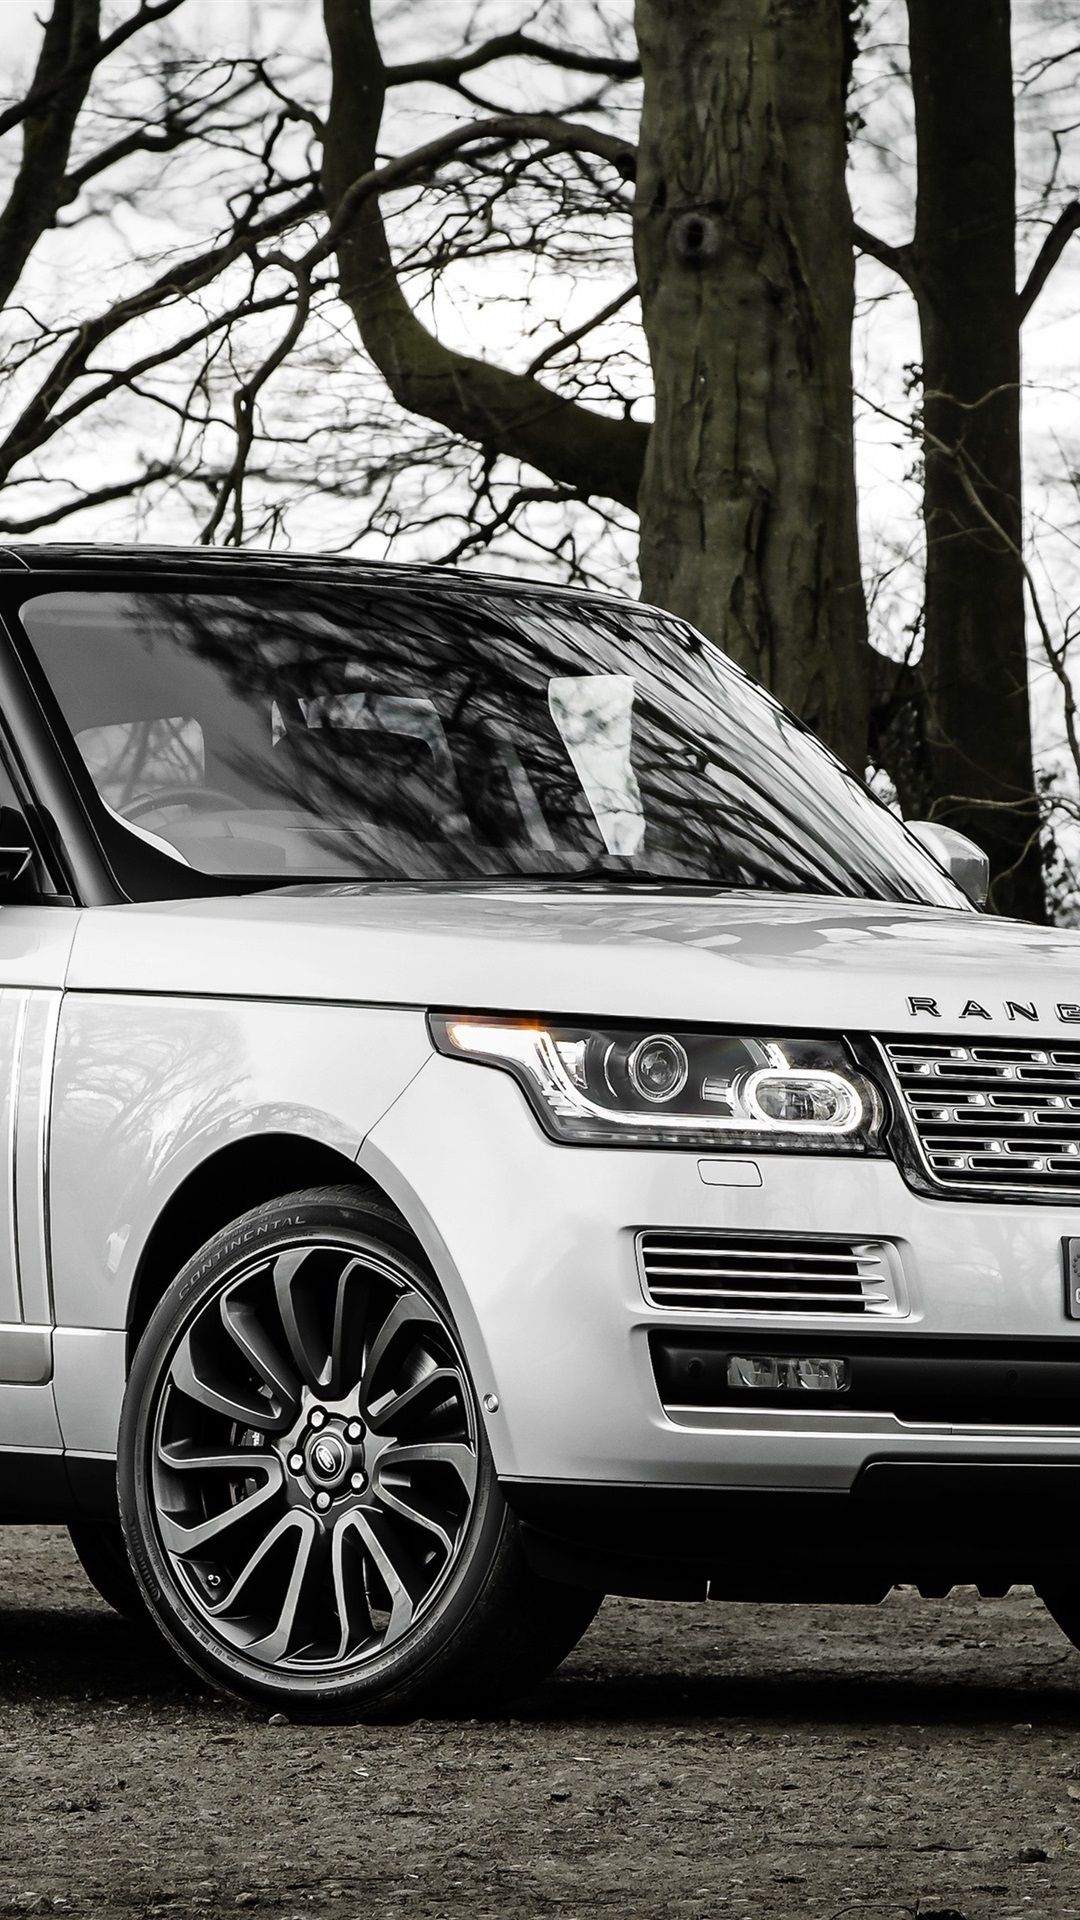 Land Rover Range Rover SUV Car, Trees 1080x1920 IPhone 8 7 6 6S